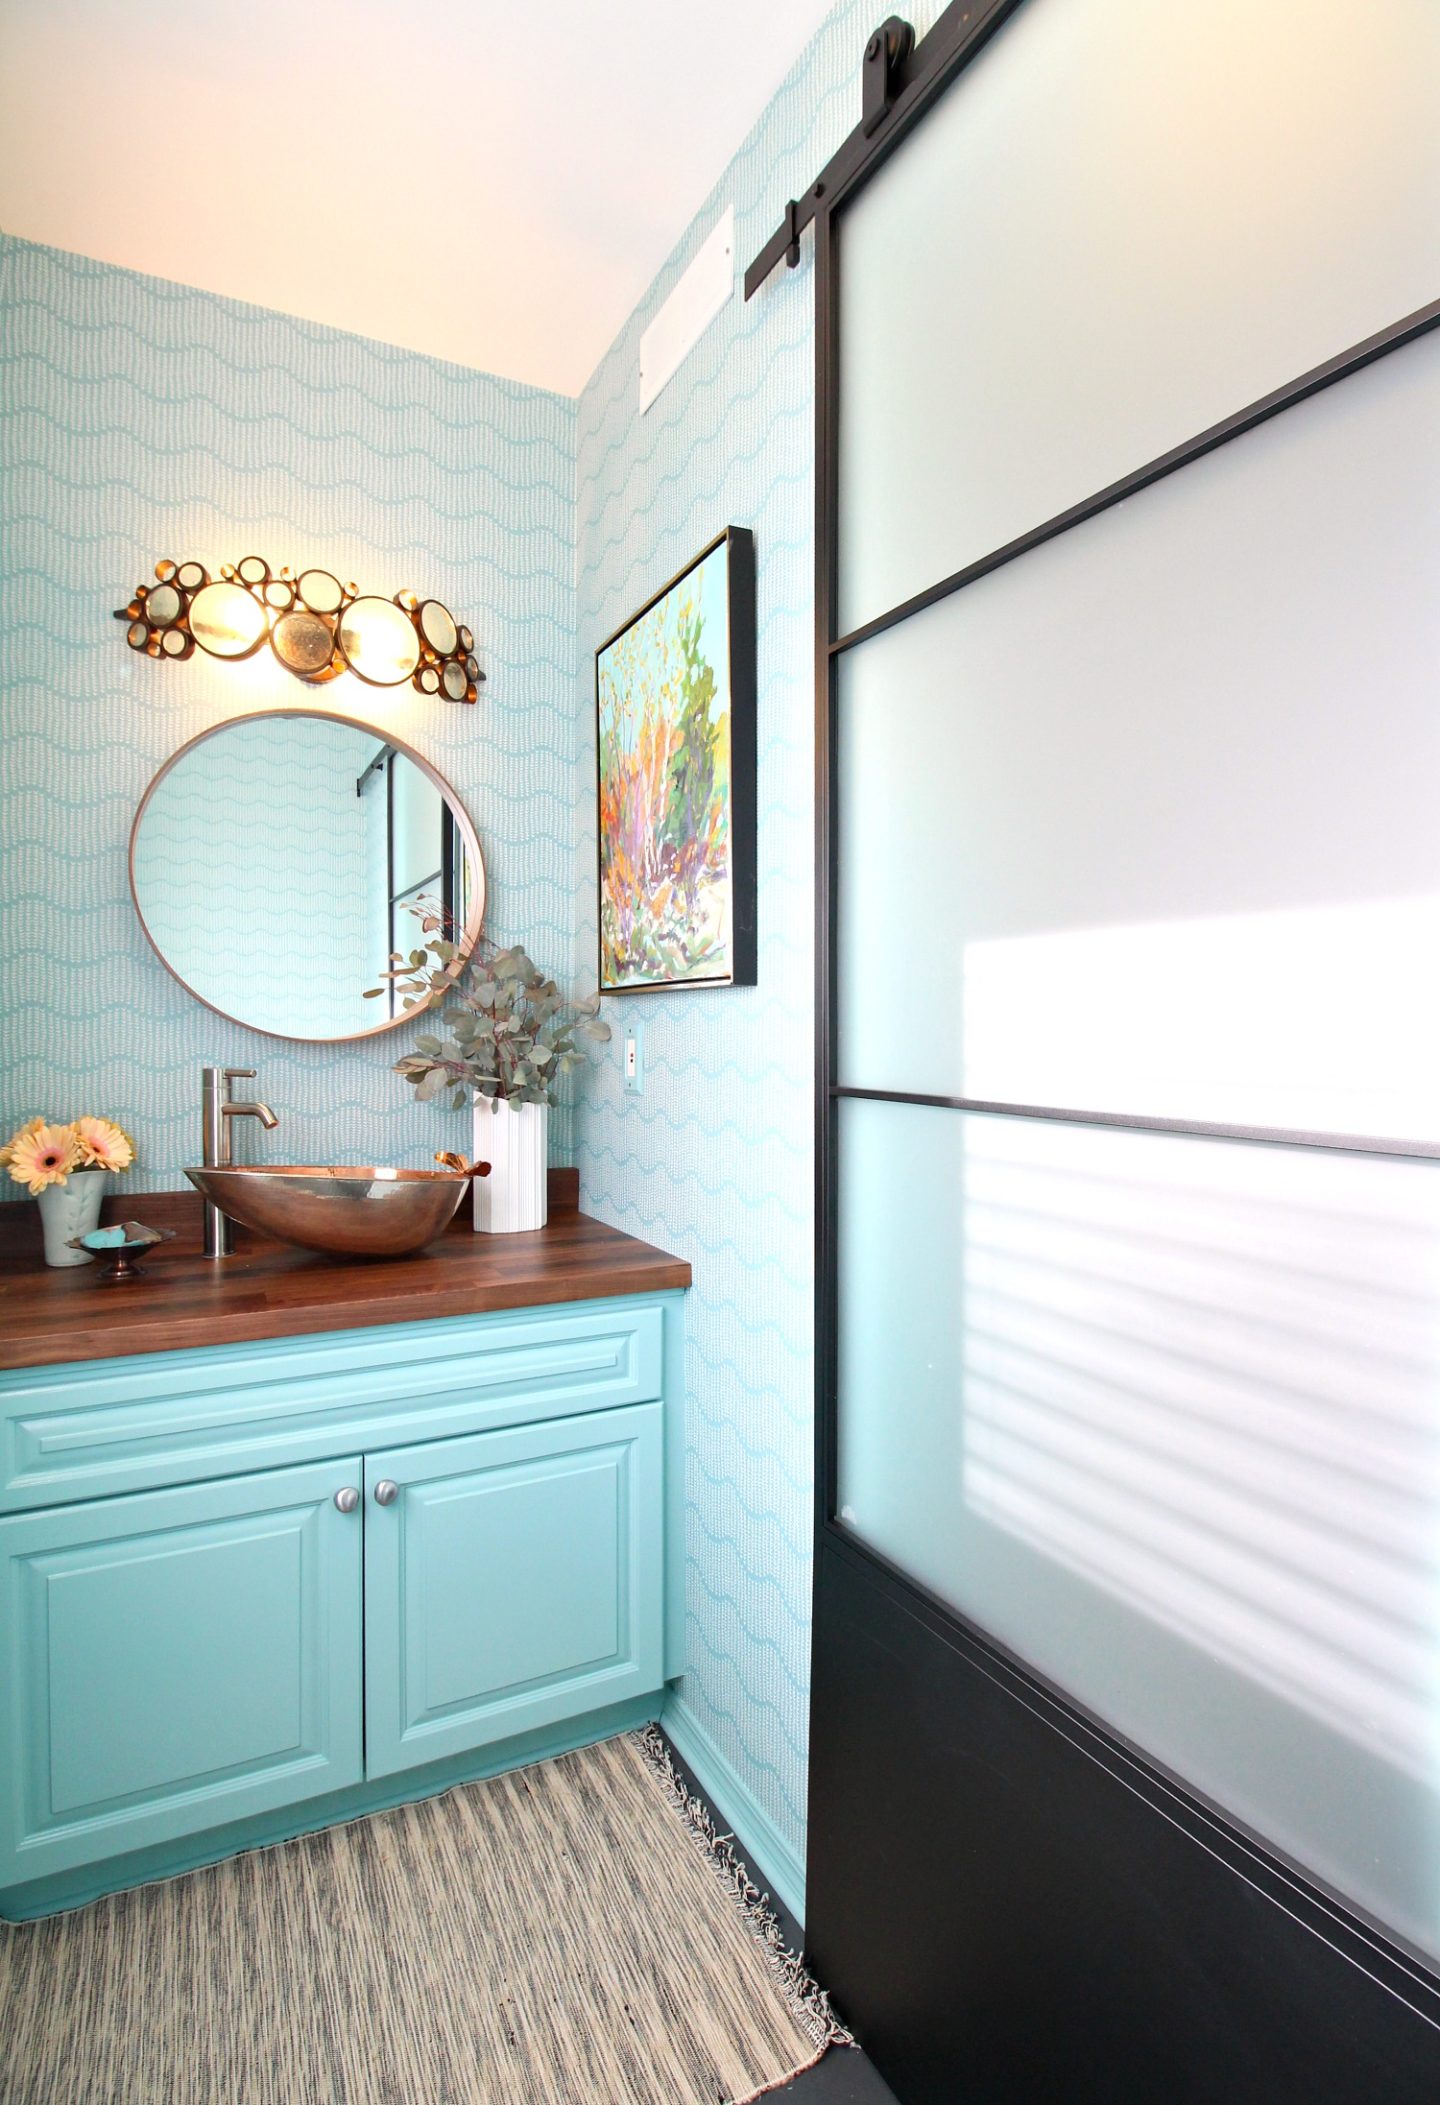 Turquoise Powder Room Makeover with Turquoise Vanity, Turquoise Sprigs on Ocean Wallpaper from Spoonflower, Walnut KARBLY Counter and Stockholm Mirror from IKEA, Handmade Copper Sink and Original Artwork